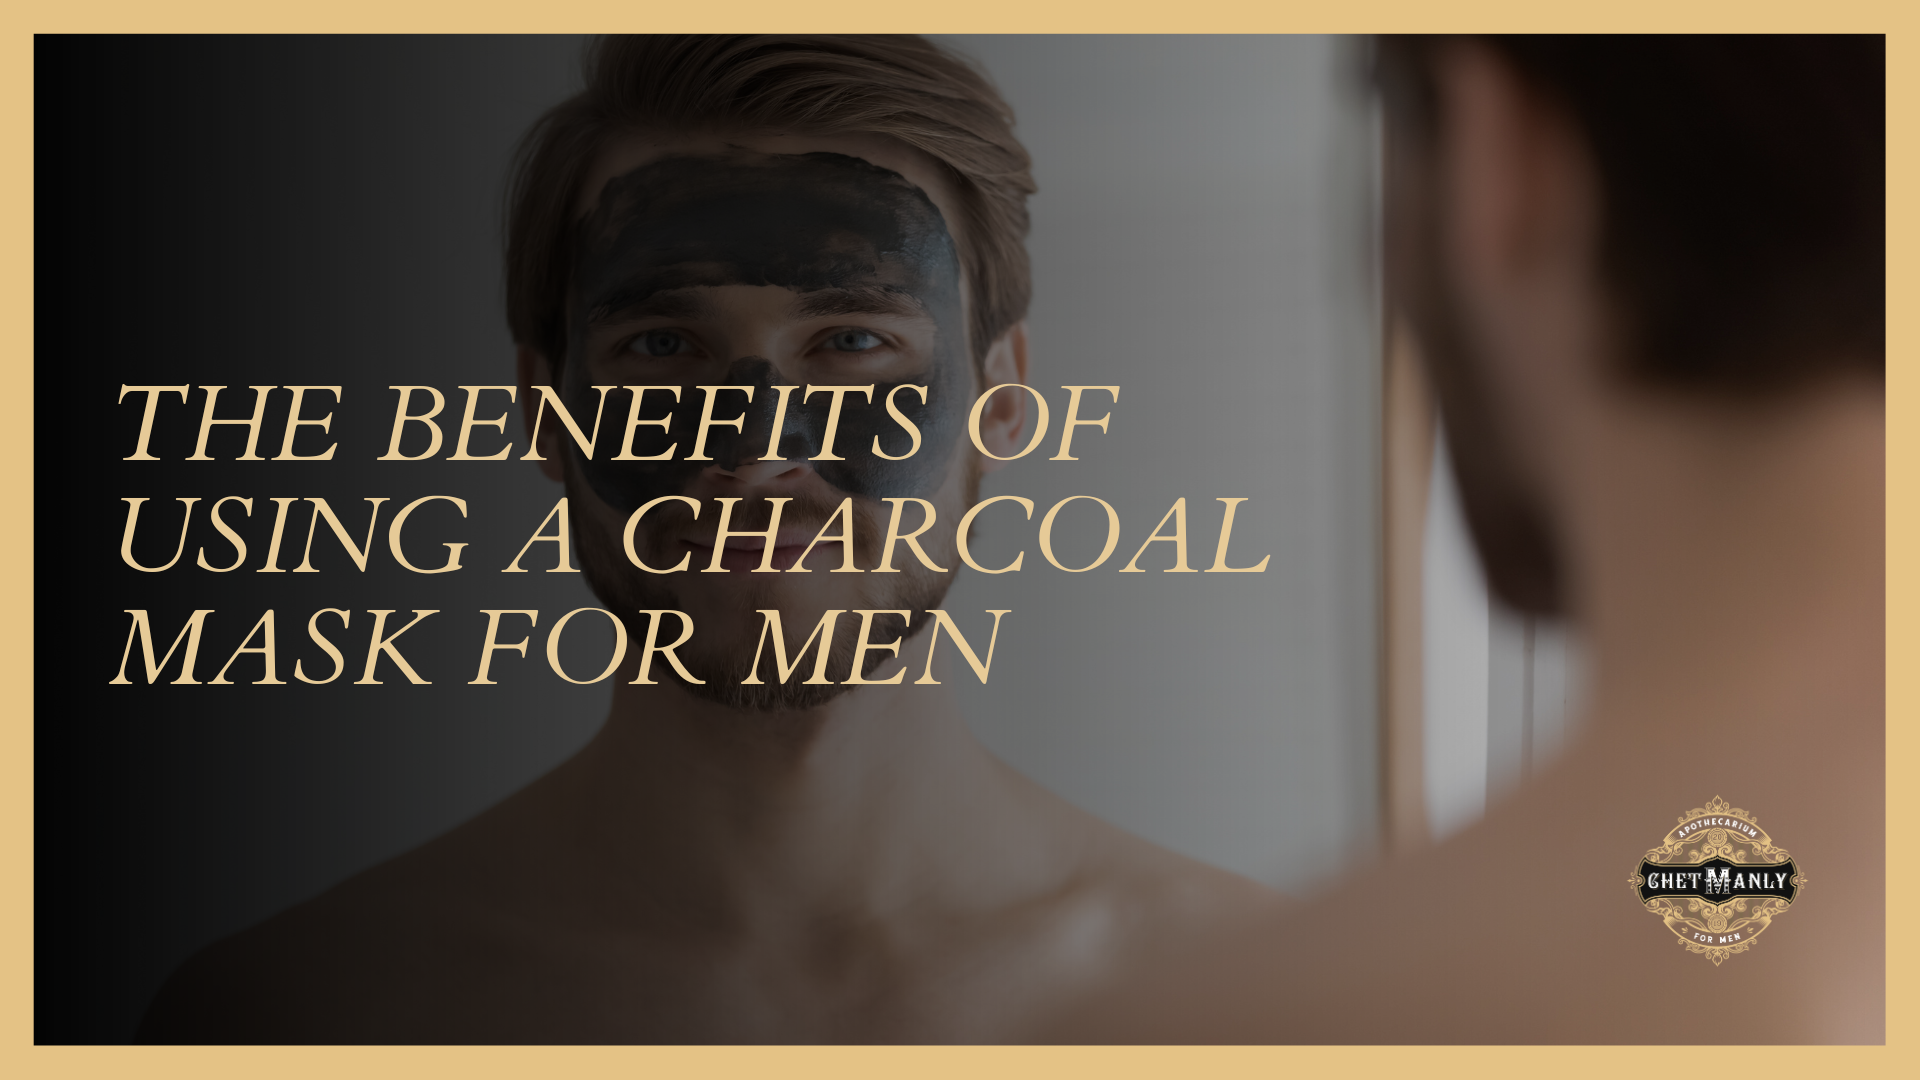 The Benefits of Using a Charcoal Mask for Men